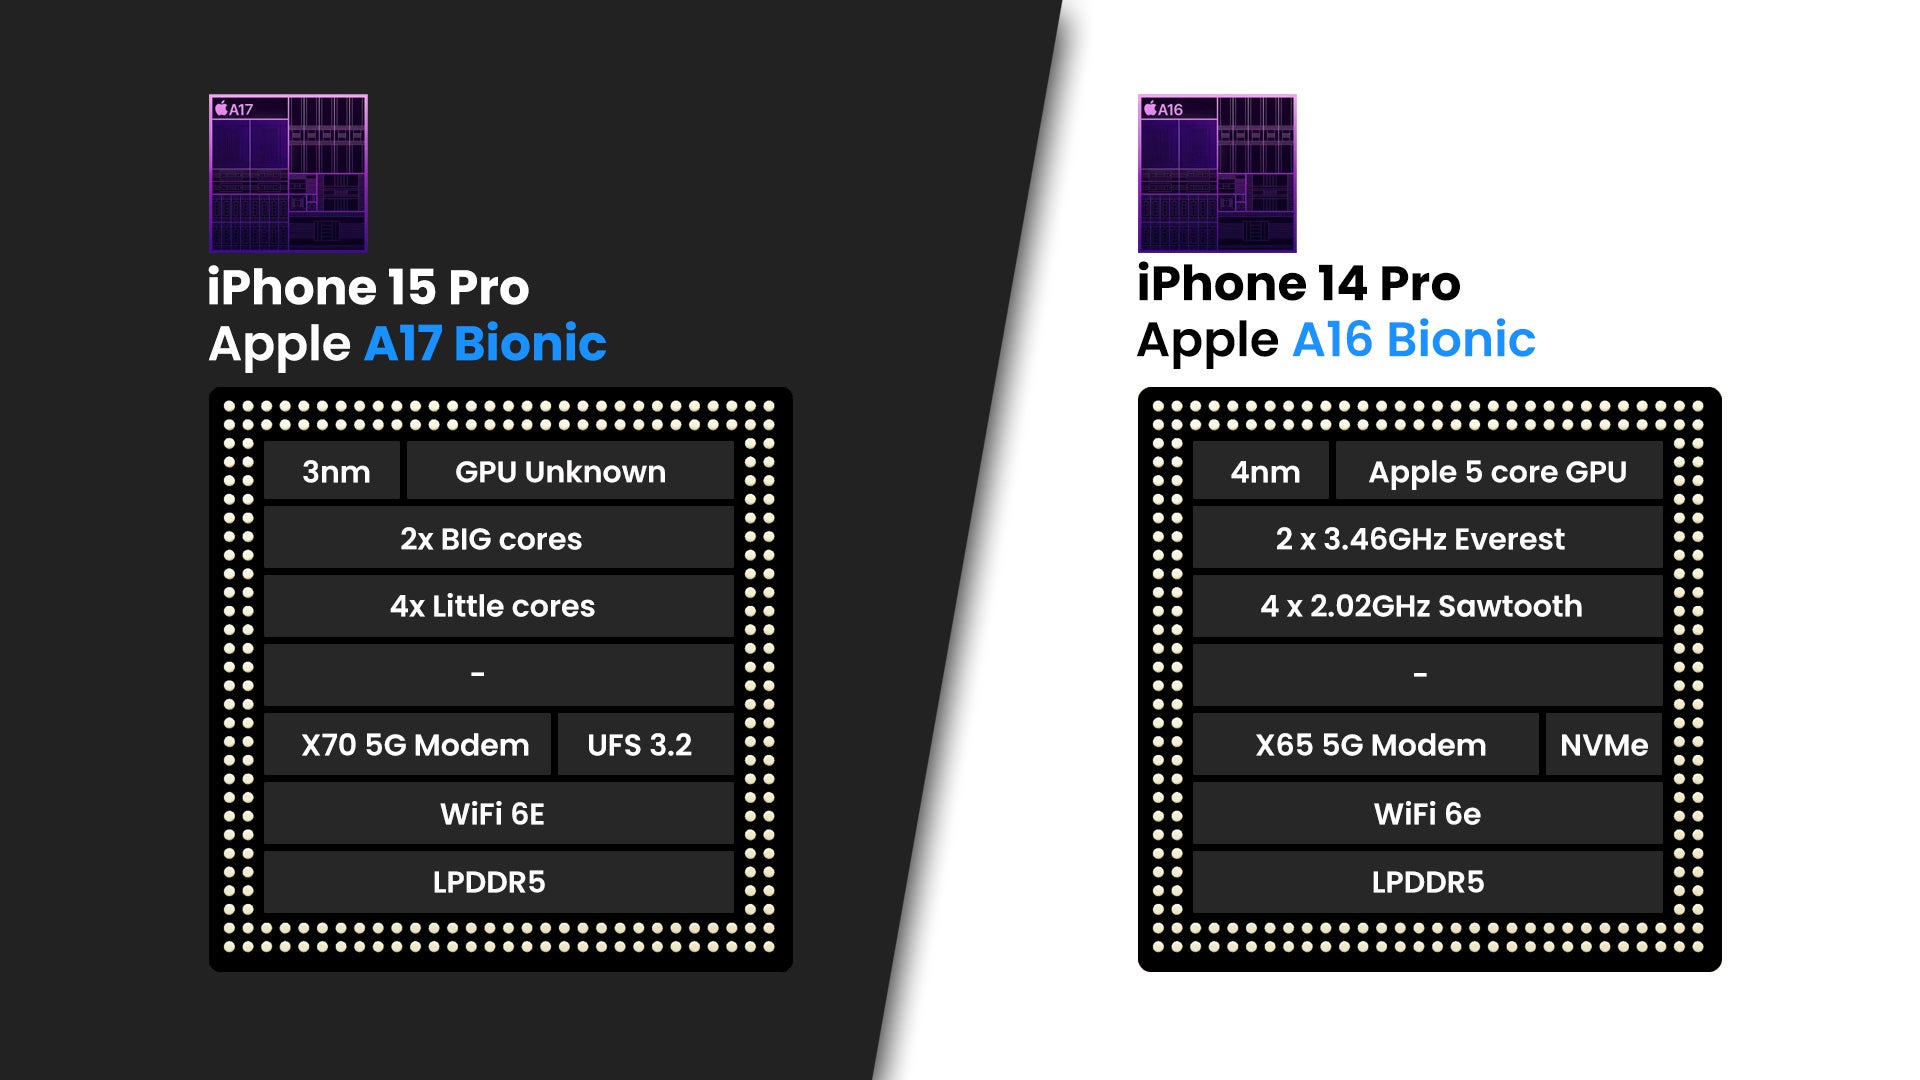 iPhone 15 Pro vs iPhone 14 Pro: expected differences